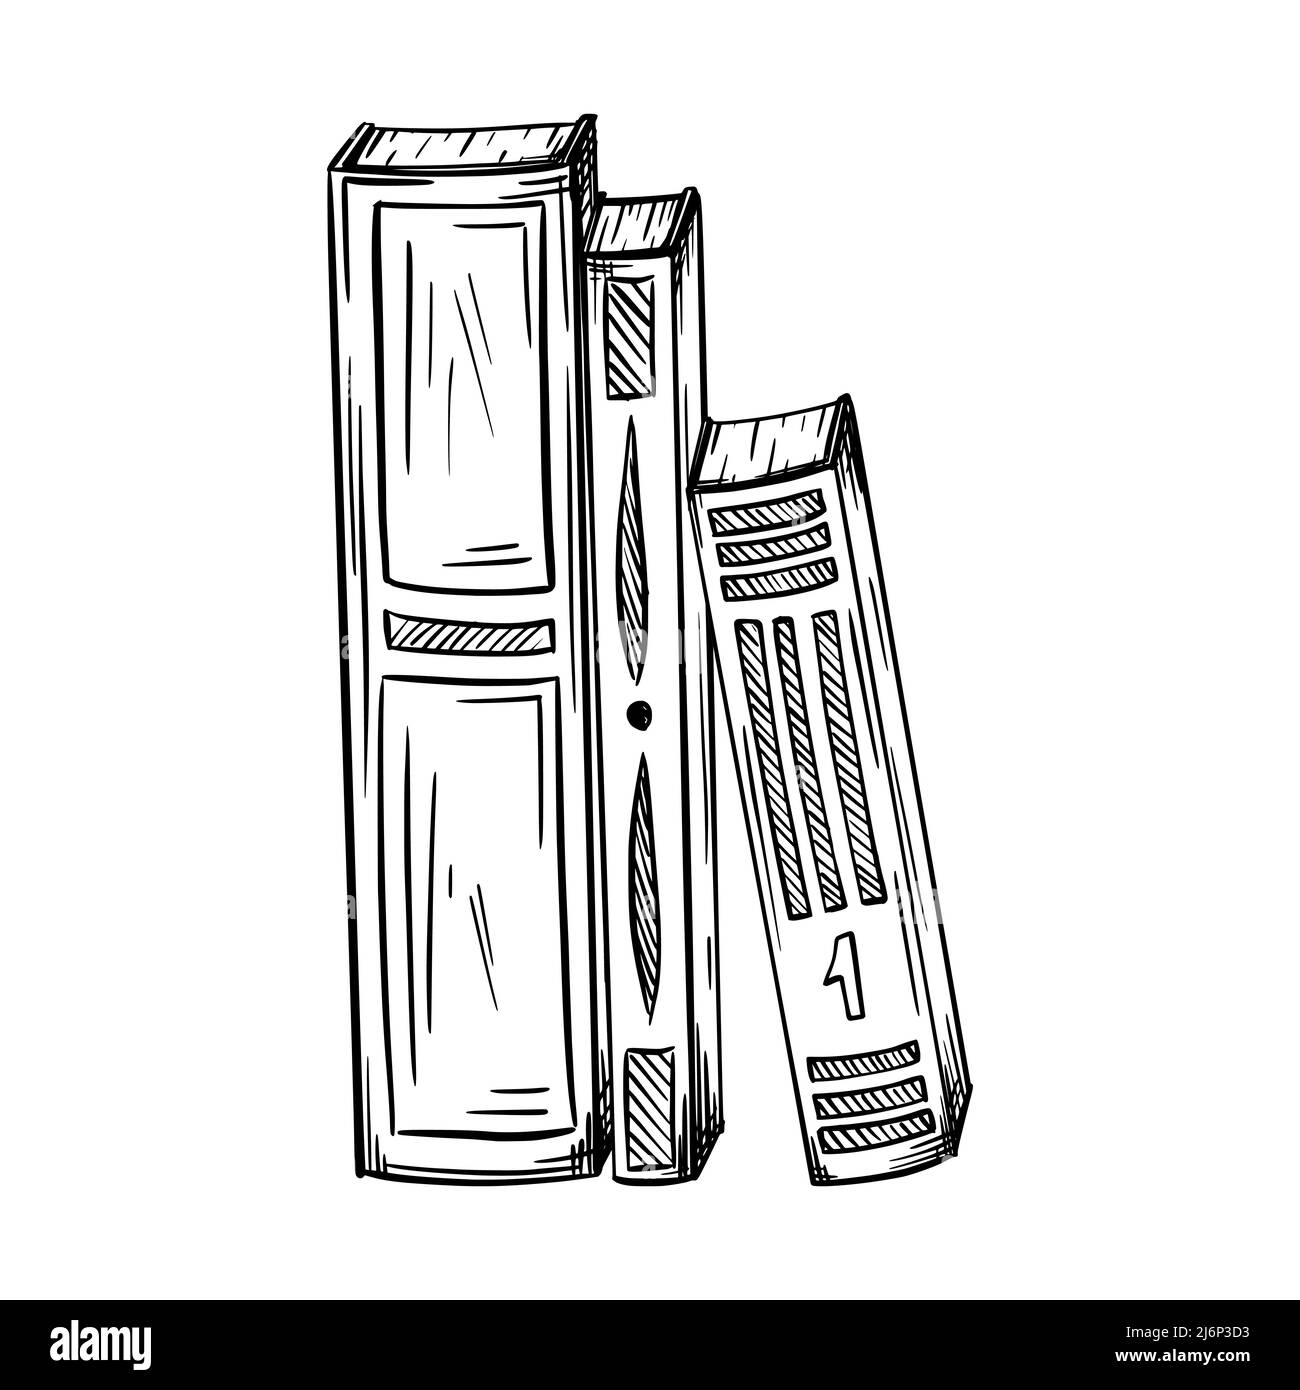 https://c8.alamy.com/comp/2J6P3D3/books-in-a-sketch-style-several-books-stand-vertically-next-to-each-othera-symbol-of-study-literature-and-education-black-and-white-vector-illust-2J6P3D3.jpg